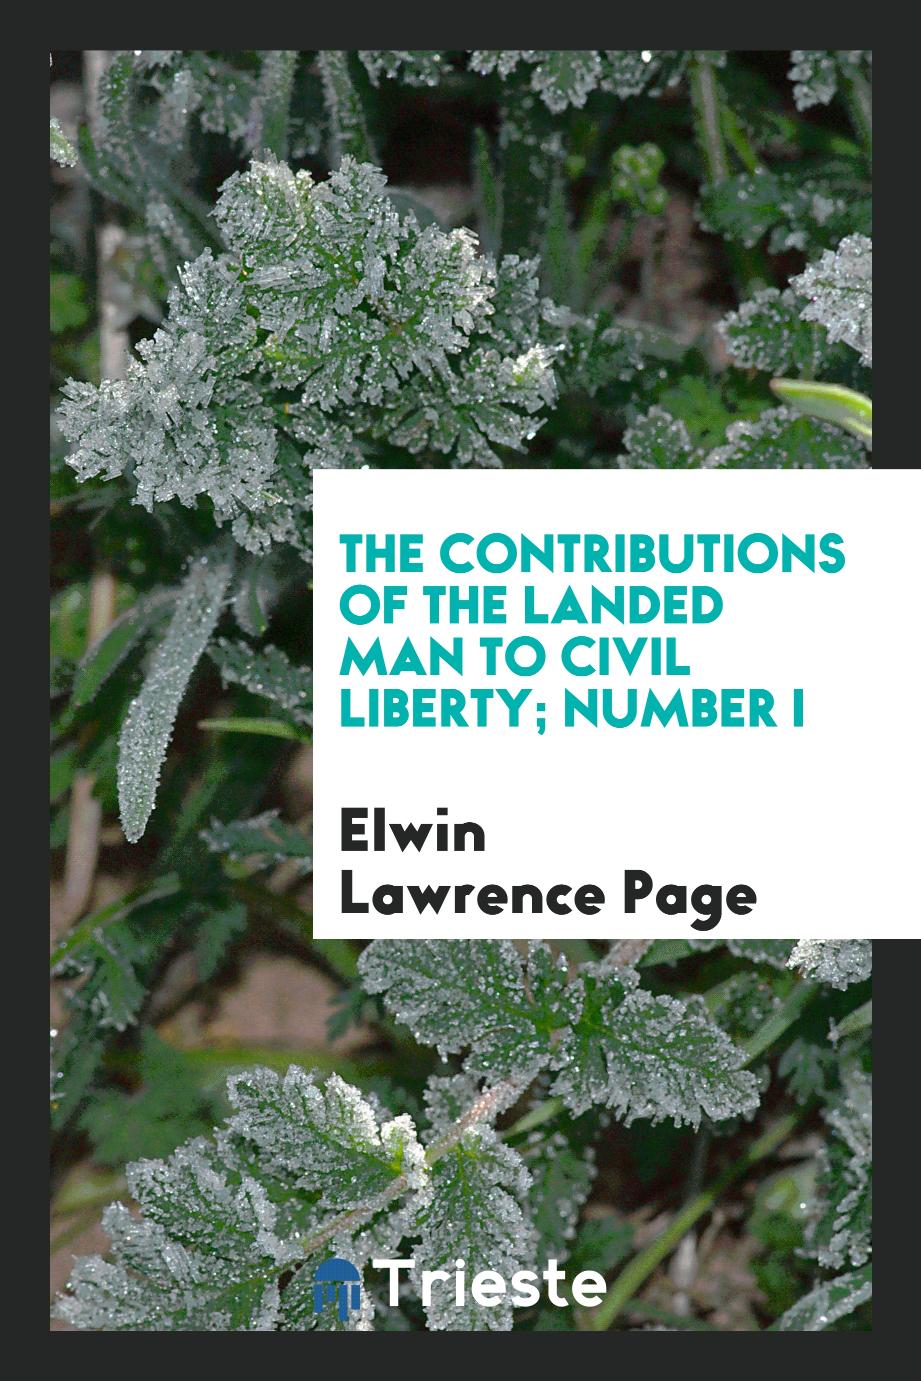 The contributions of the landed man to civil liberty; Number I